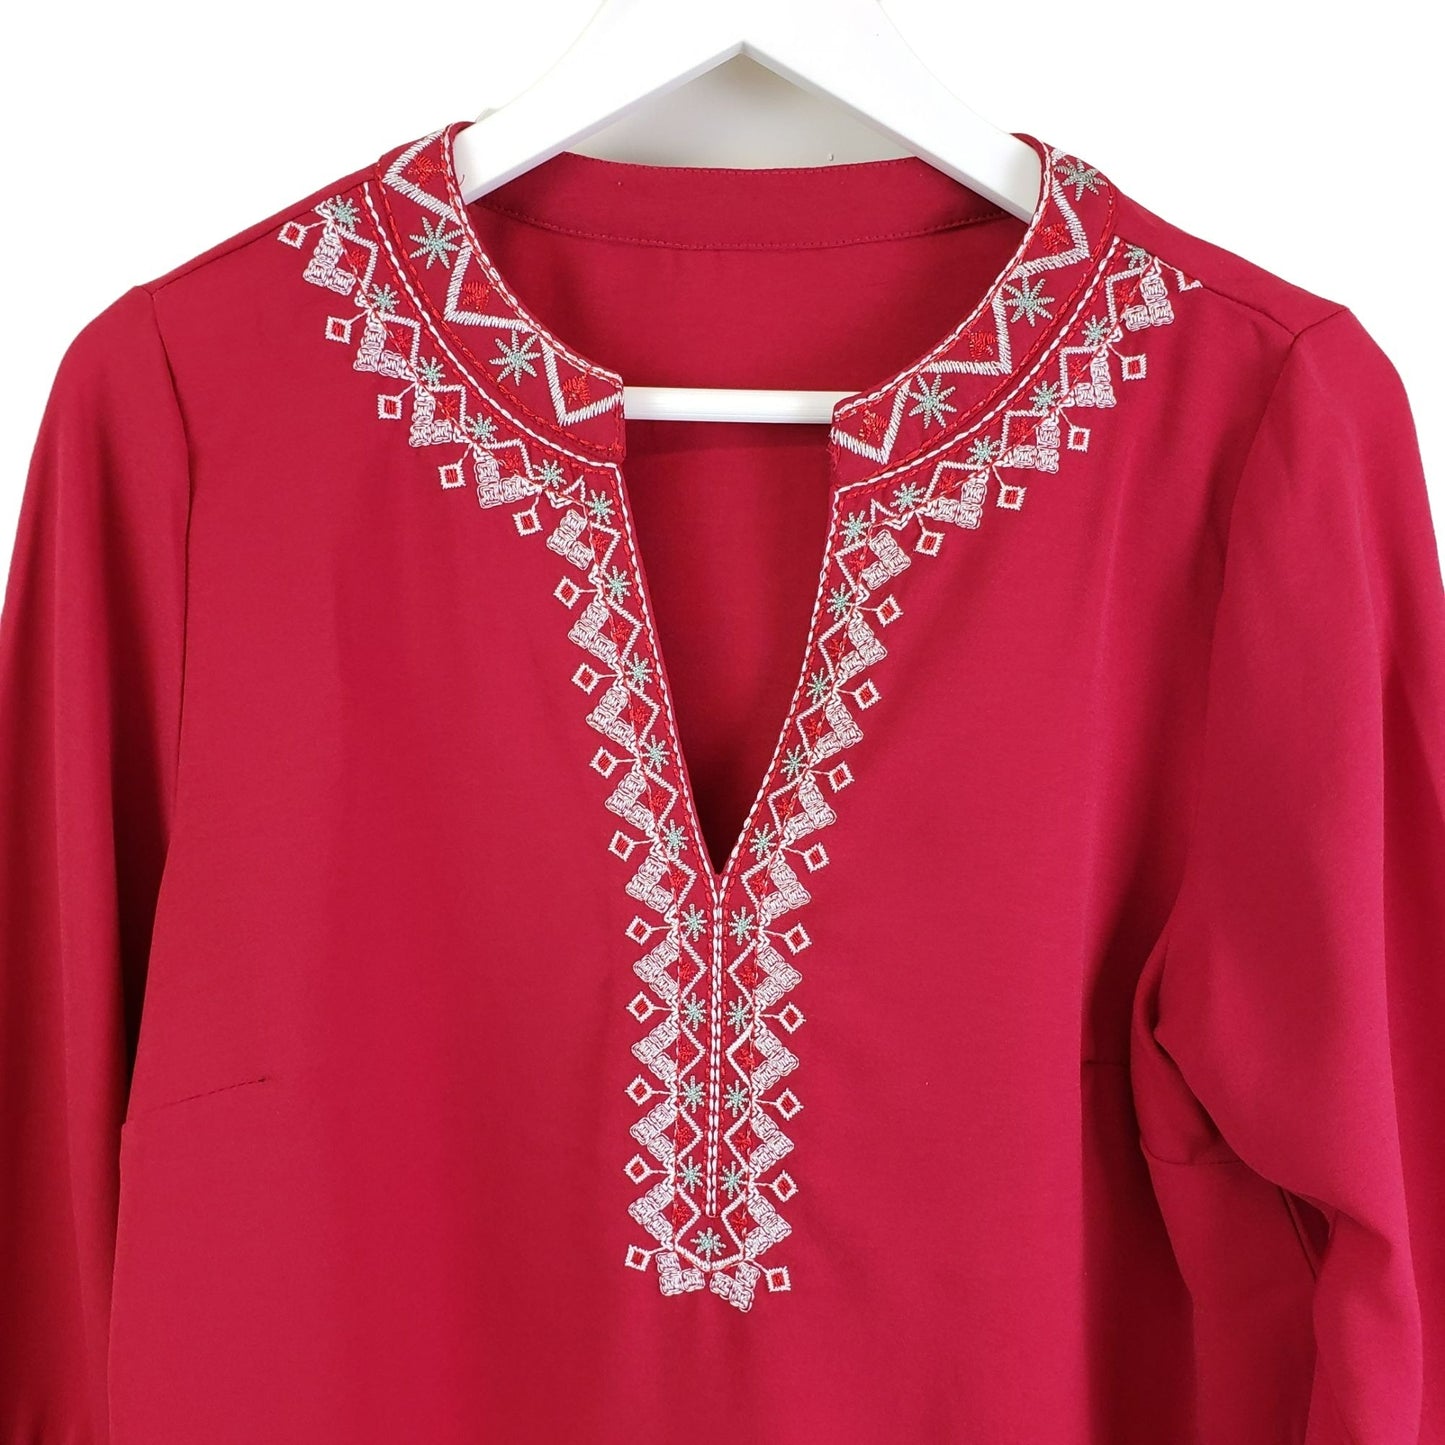 Unbranded Embroidered Boho Blouse with Bell Sleeves Size Medium